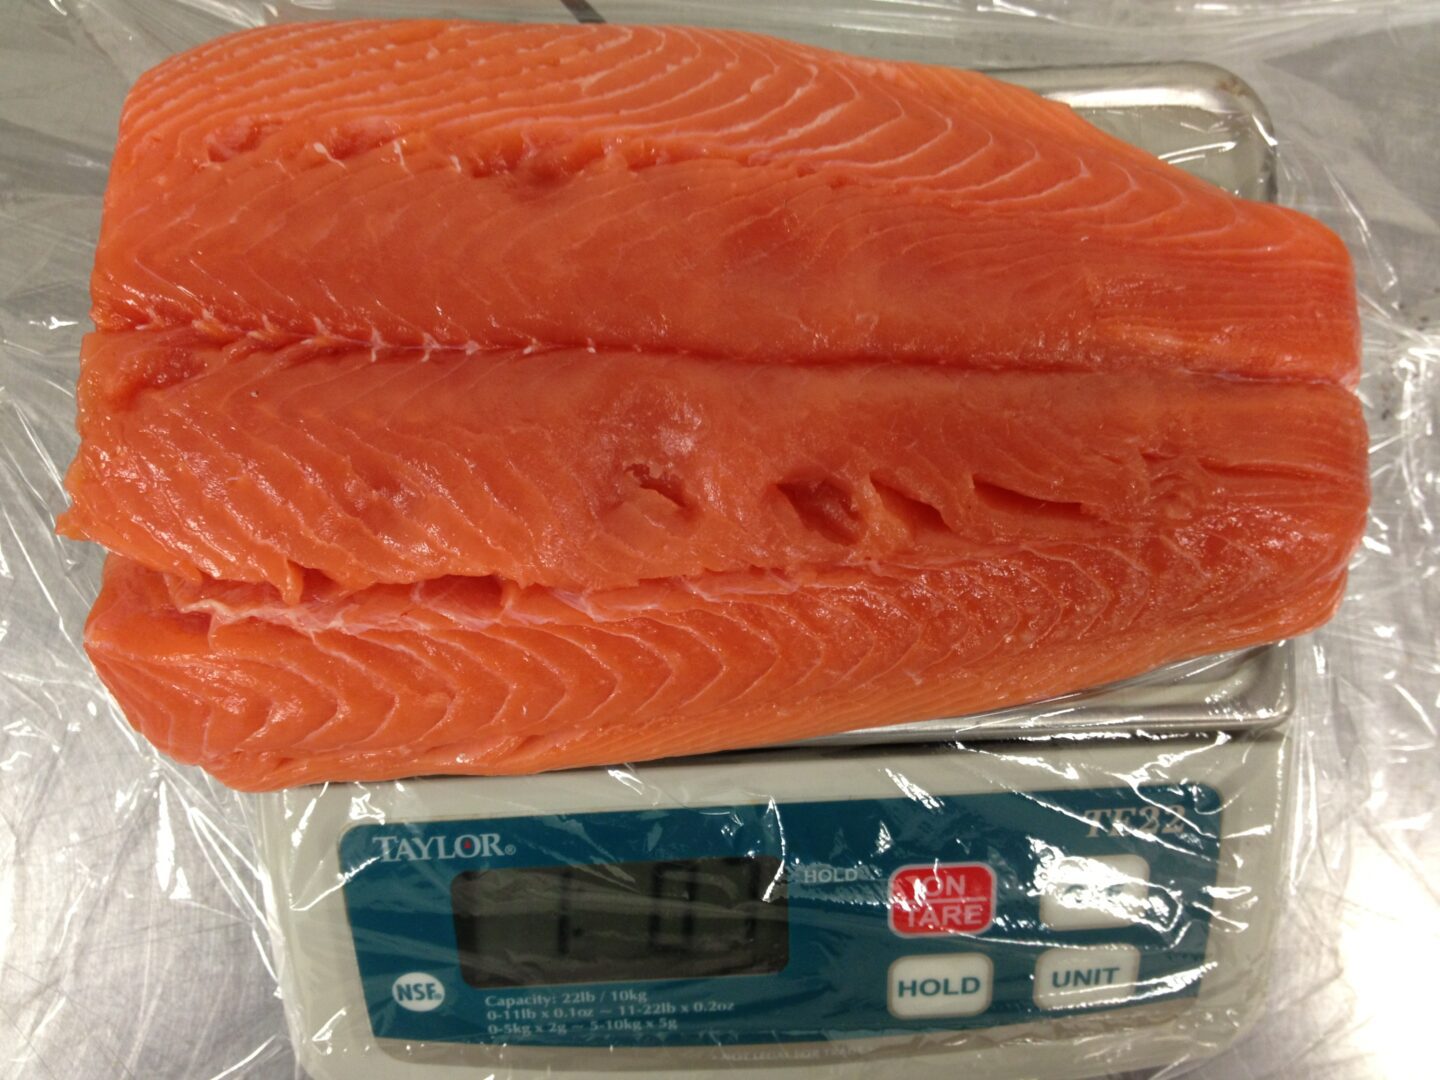 A piece of salmon is sitting on a scale.